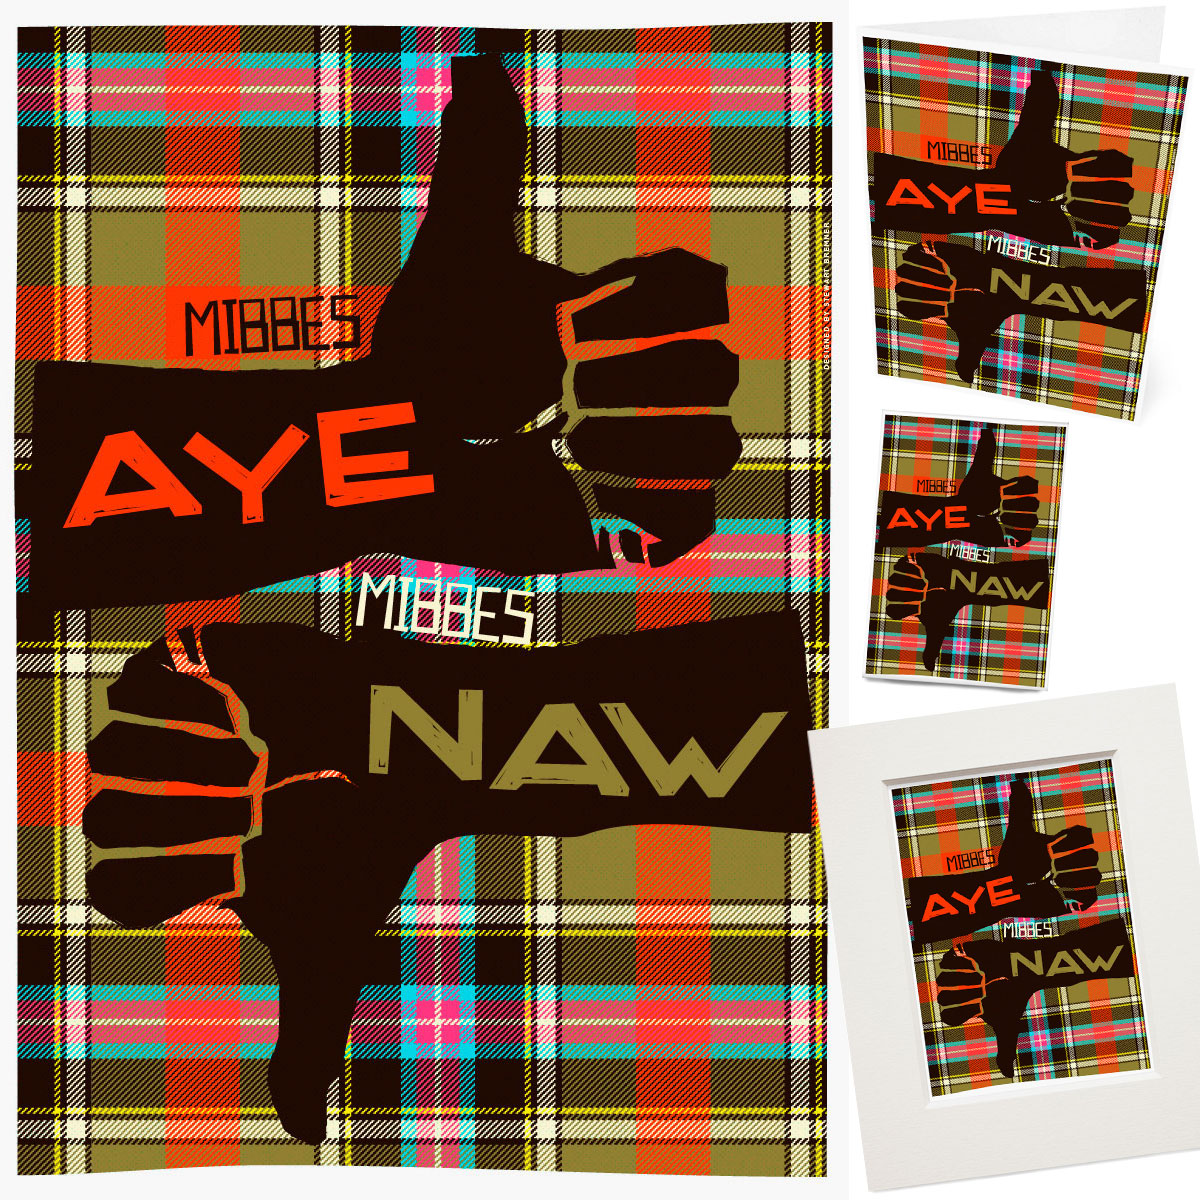 Mibbes aye, mibbes naw. Says it aw, really. Shop noo for posters, cairds an mair. #scotslanguage #ScotsLeid @indy_prints indy-prints.com/search?type=pr…